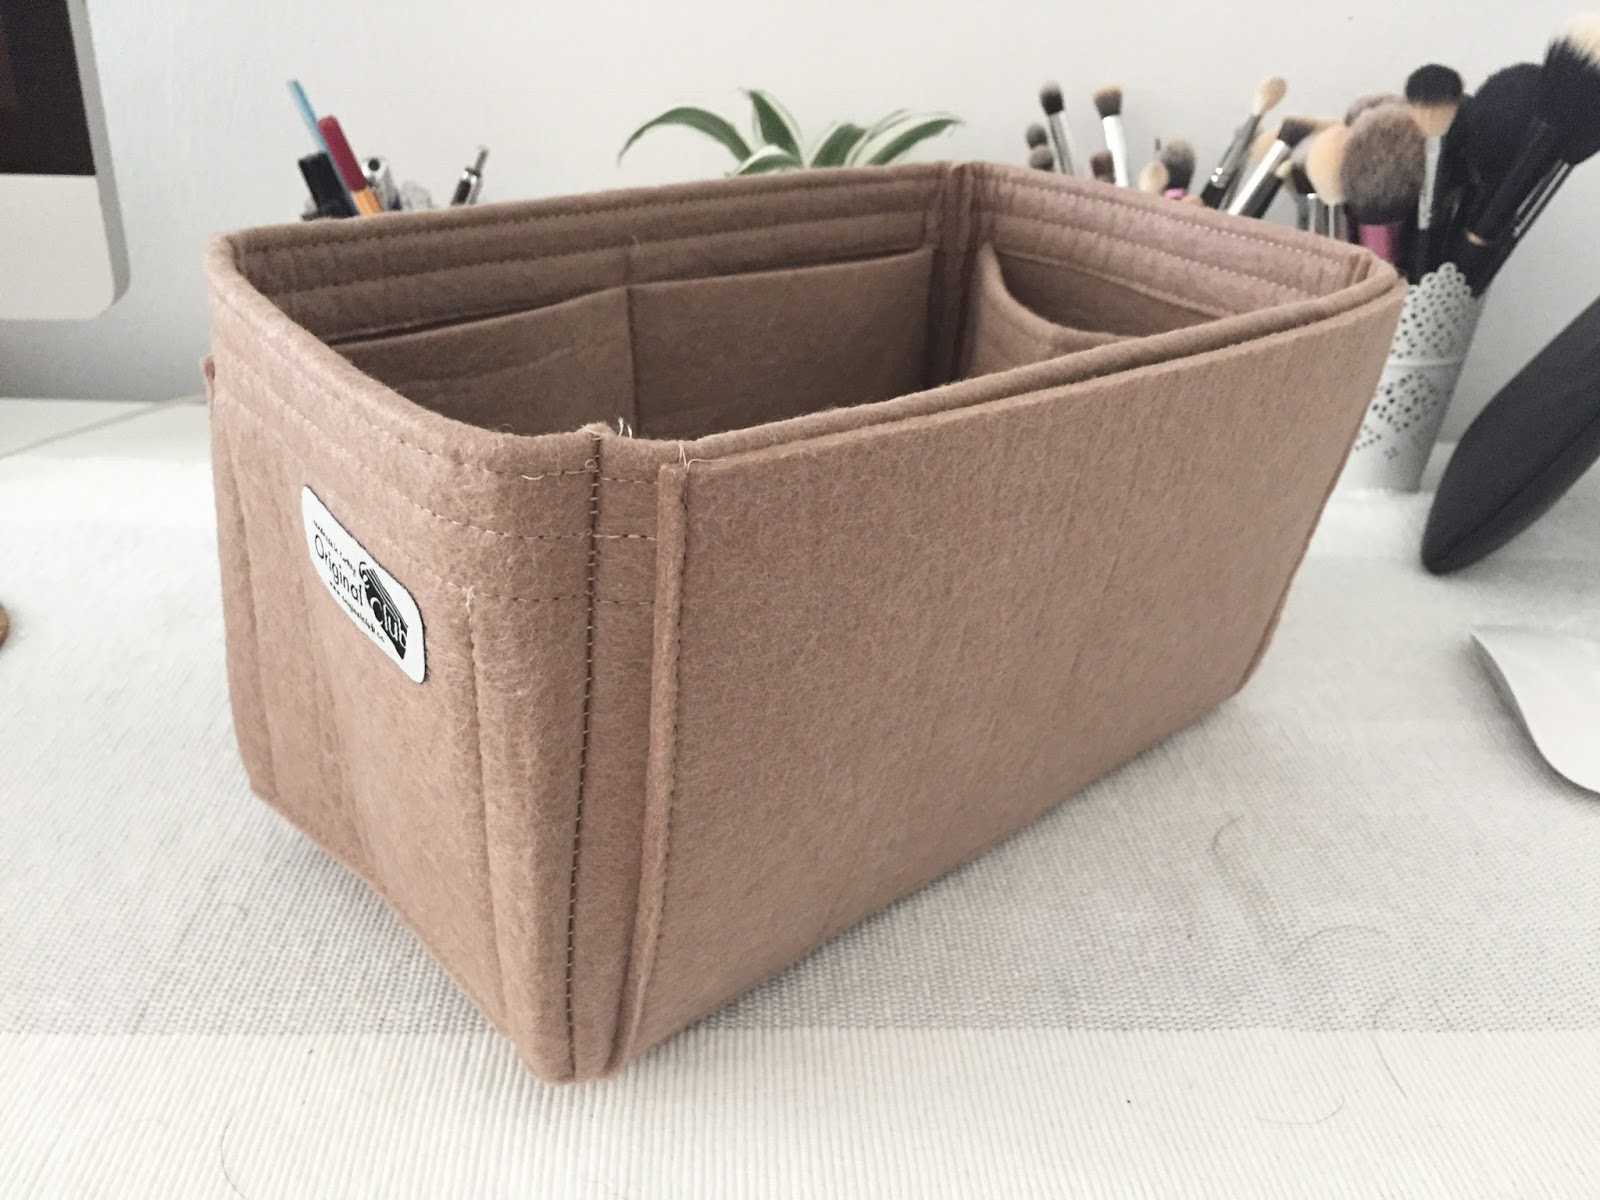 What could fit in this - Samorga - perfect bag organizer